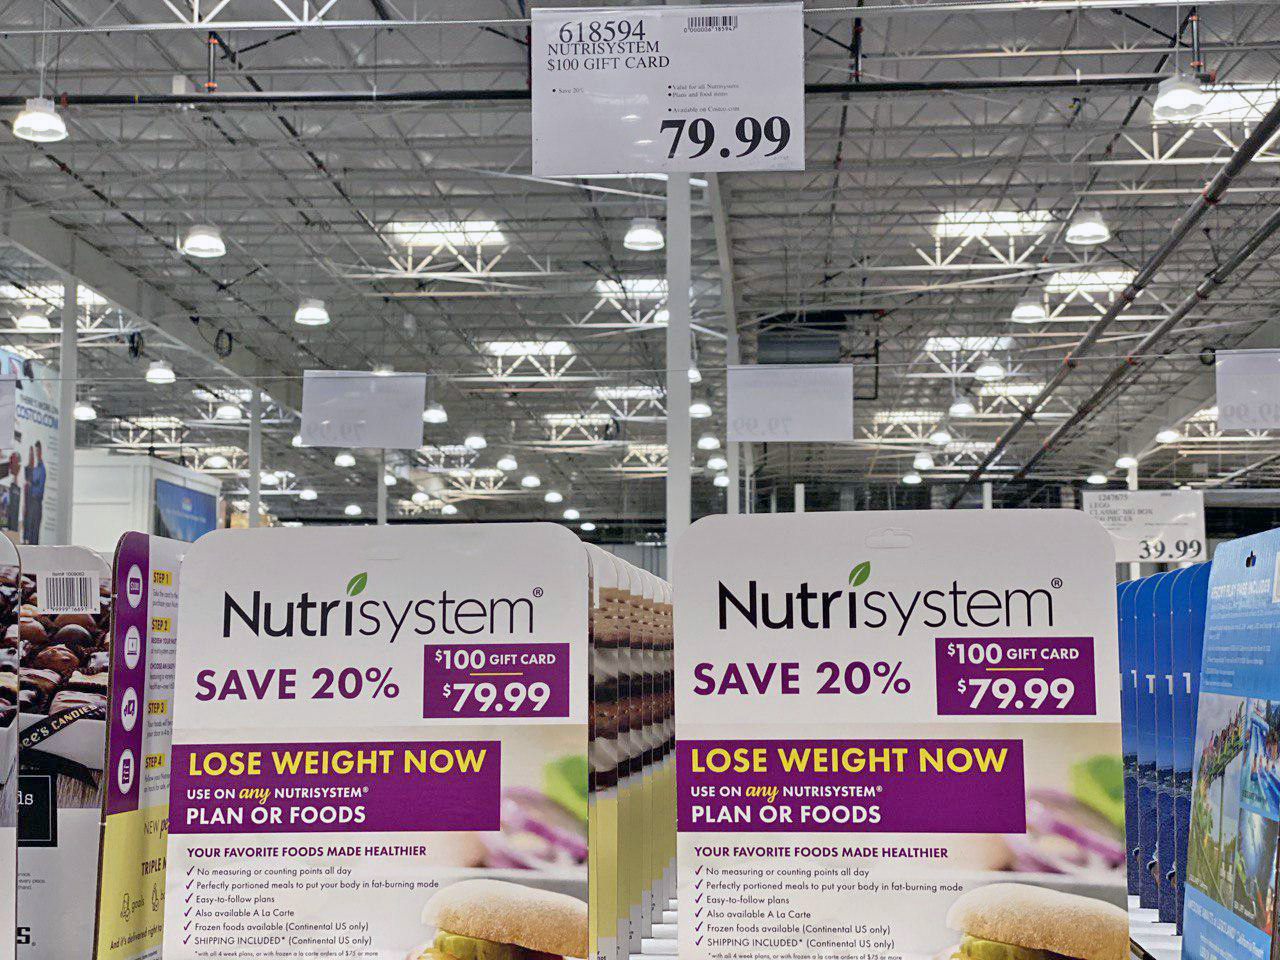 NutriSystem 20% off Costco Coupon